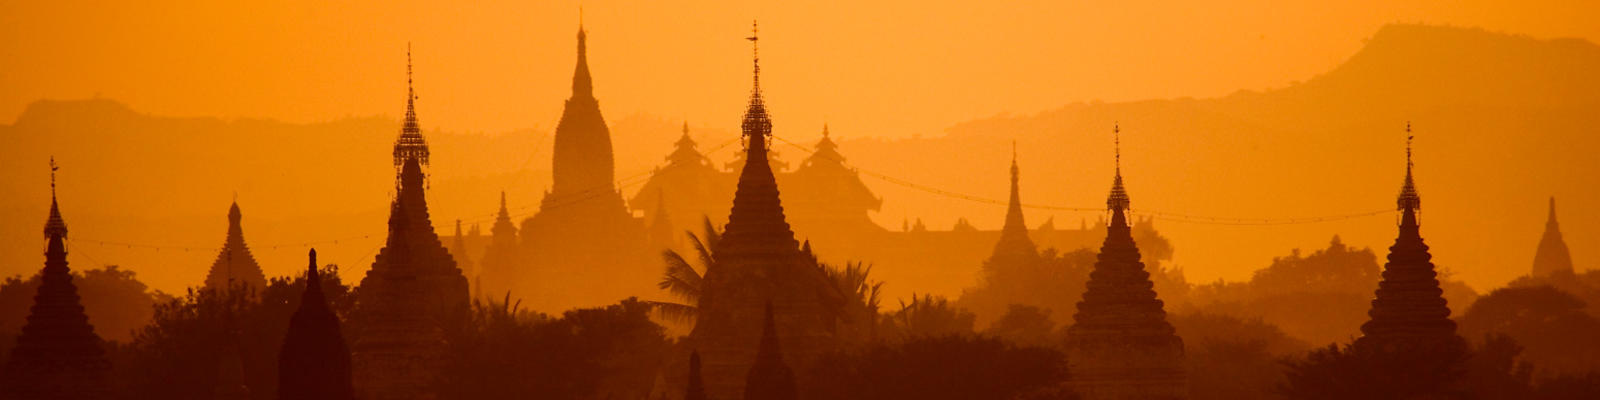 A golden sunset over the temples of Bagan in Myanmar.